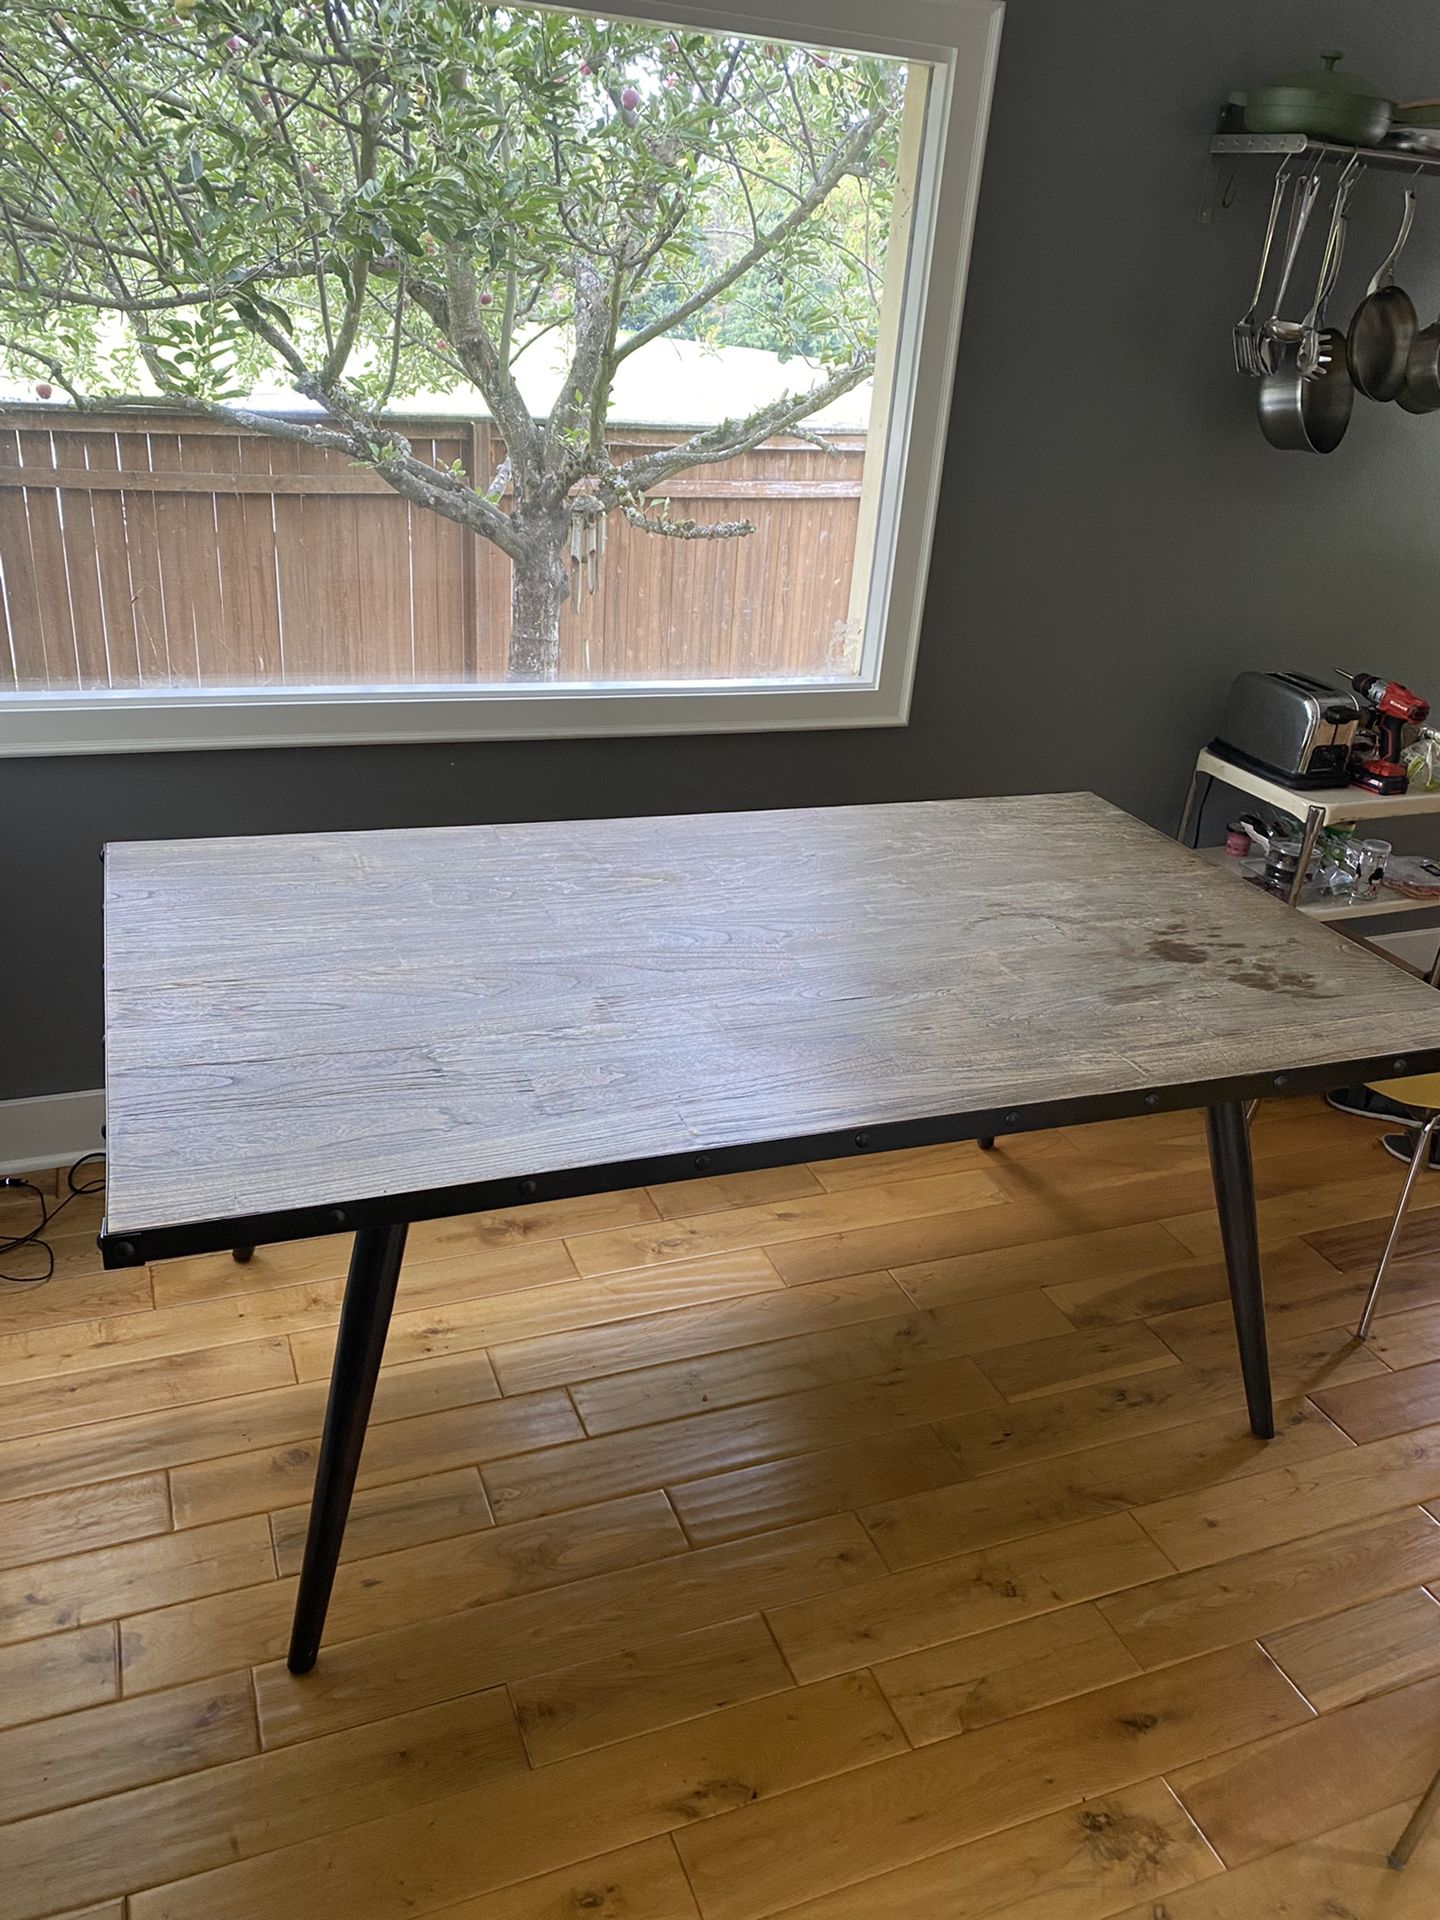 Kitchen Table For Sale $80